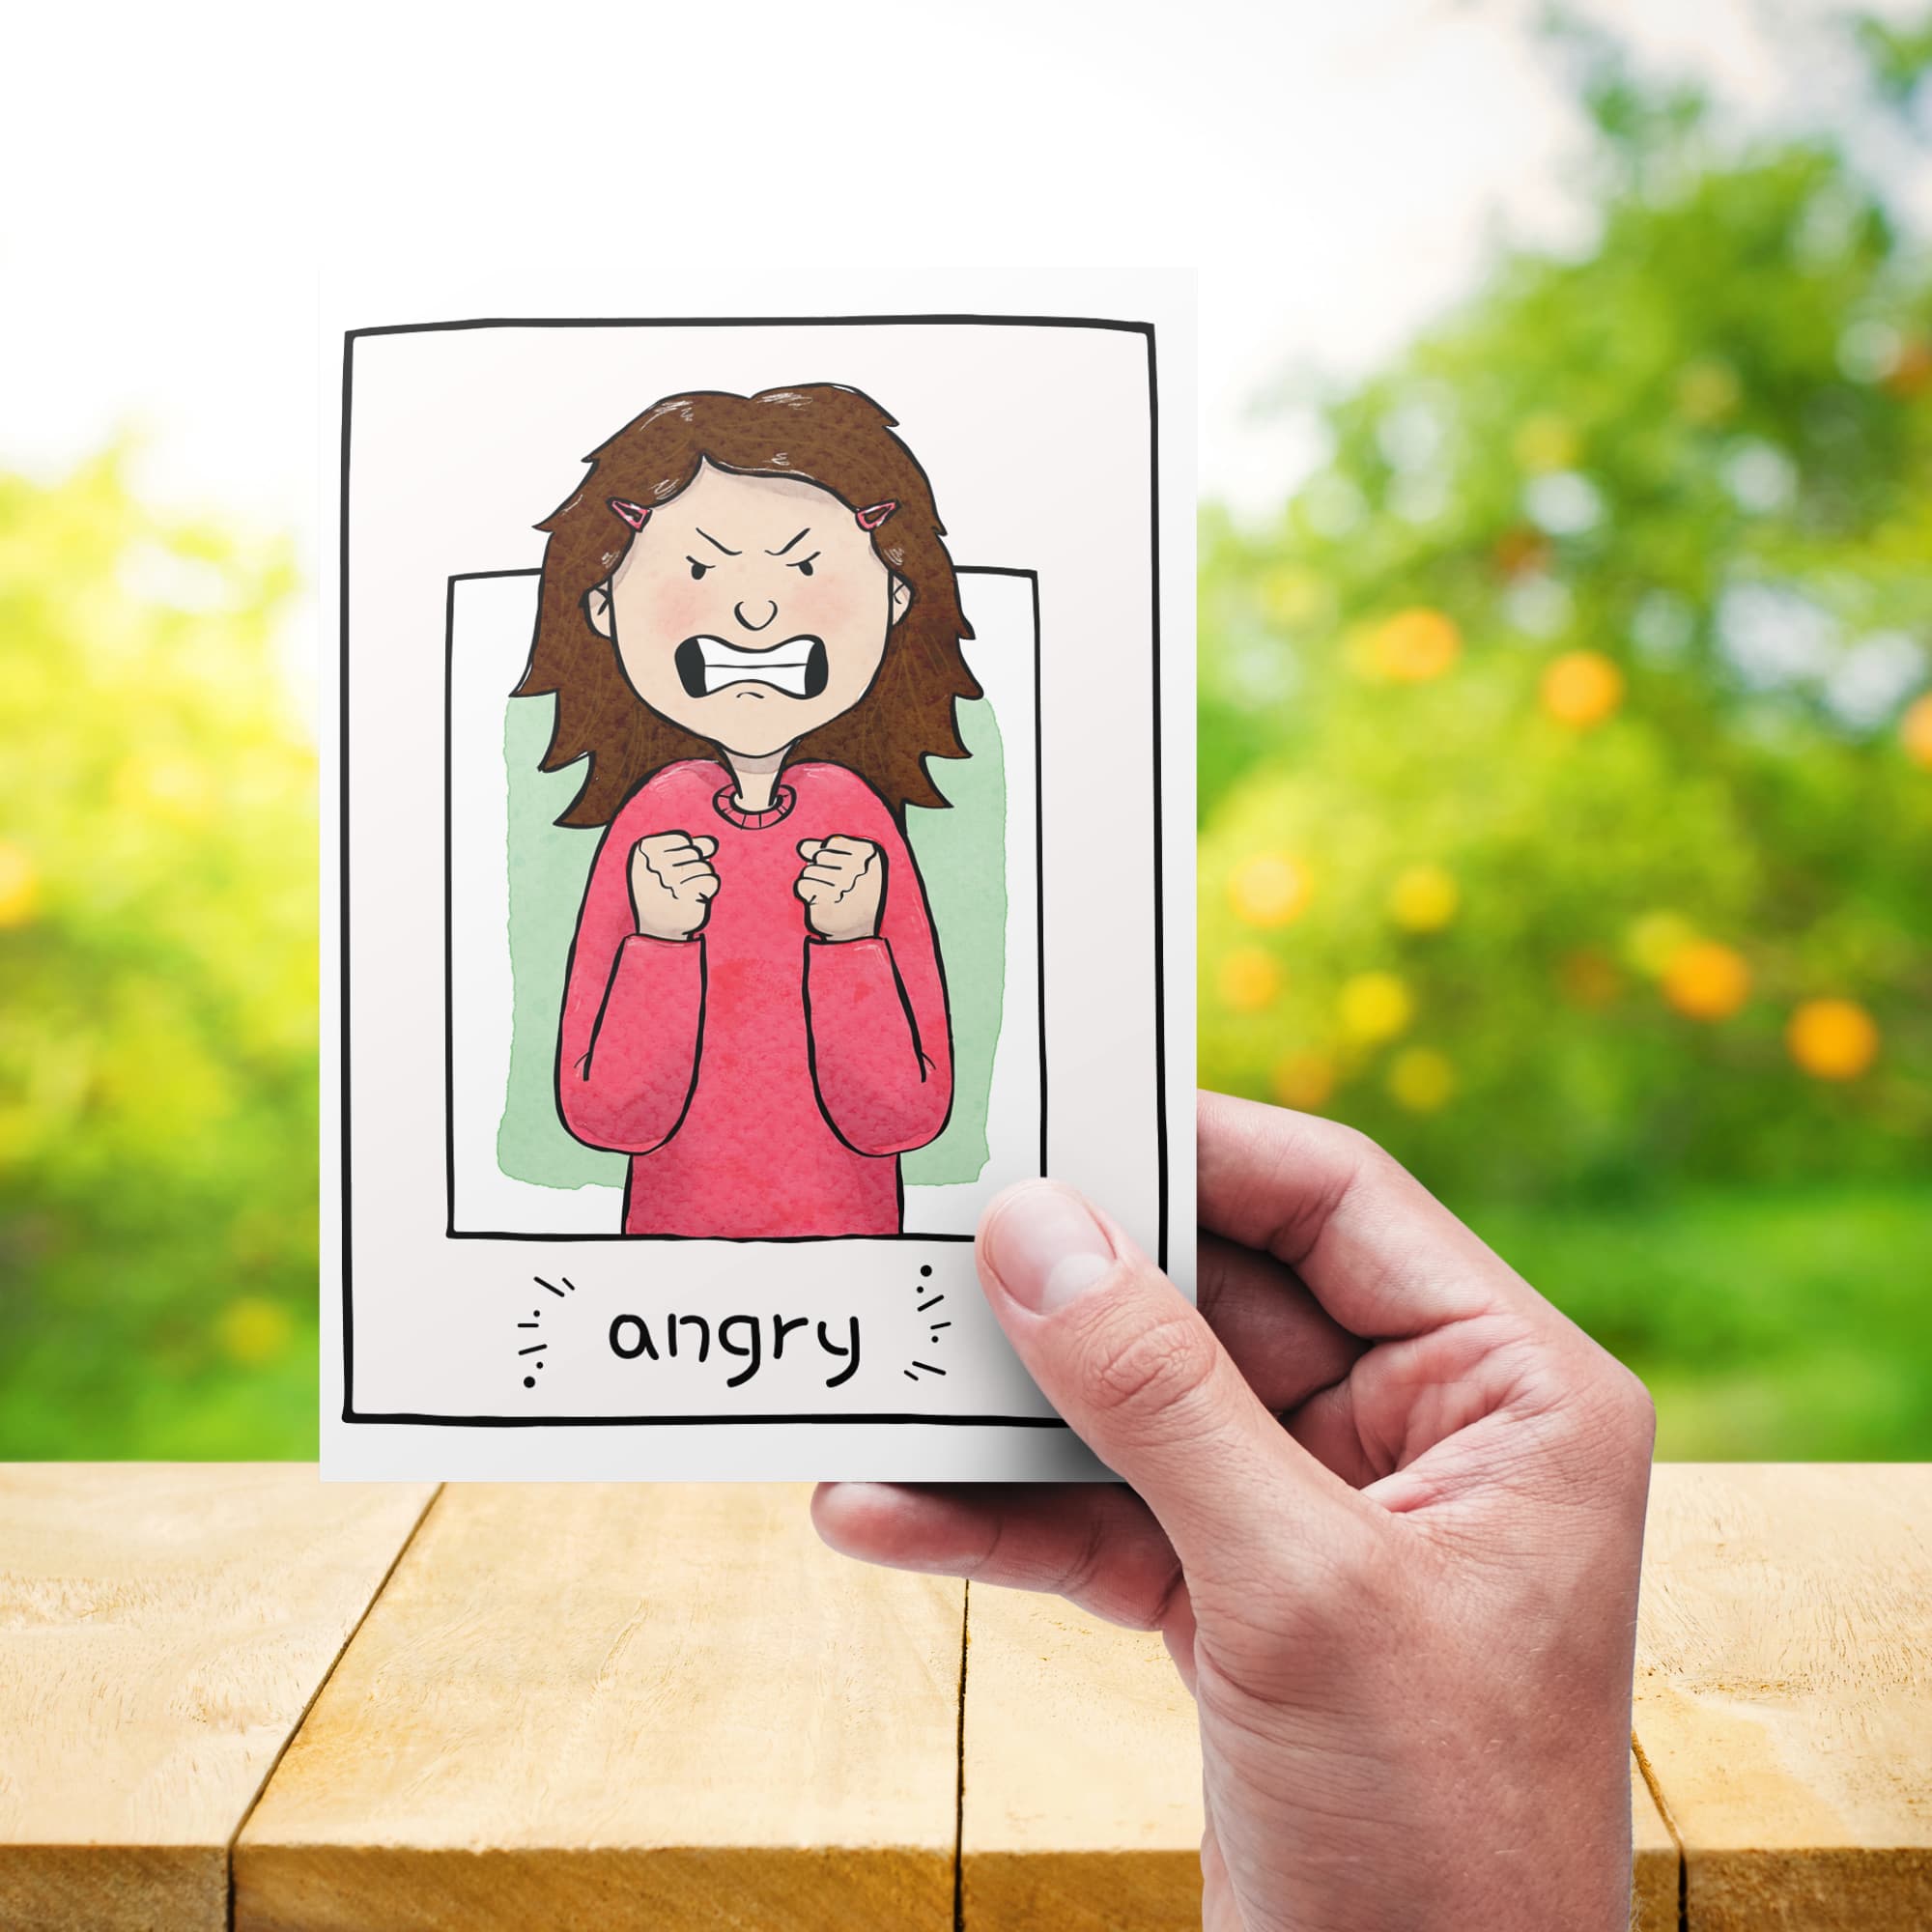 Emotion Flashcards PDF (ages 2 to 10)